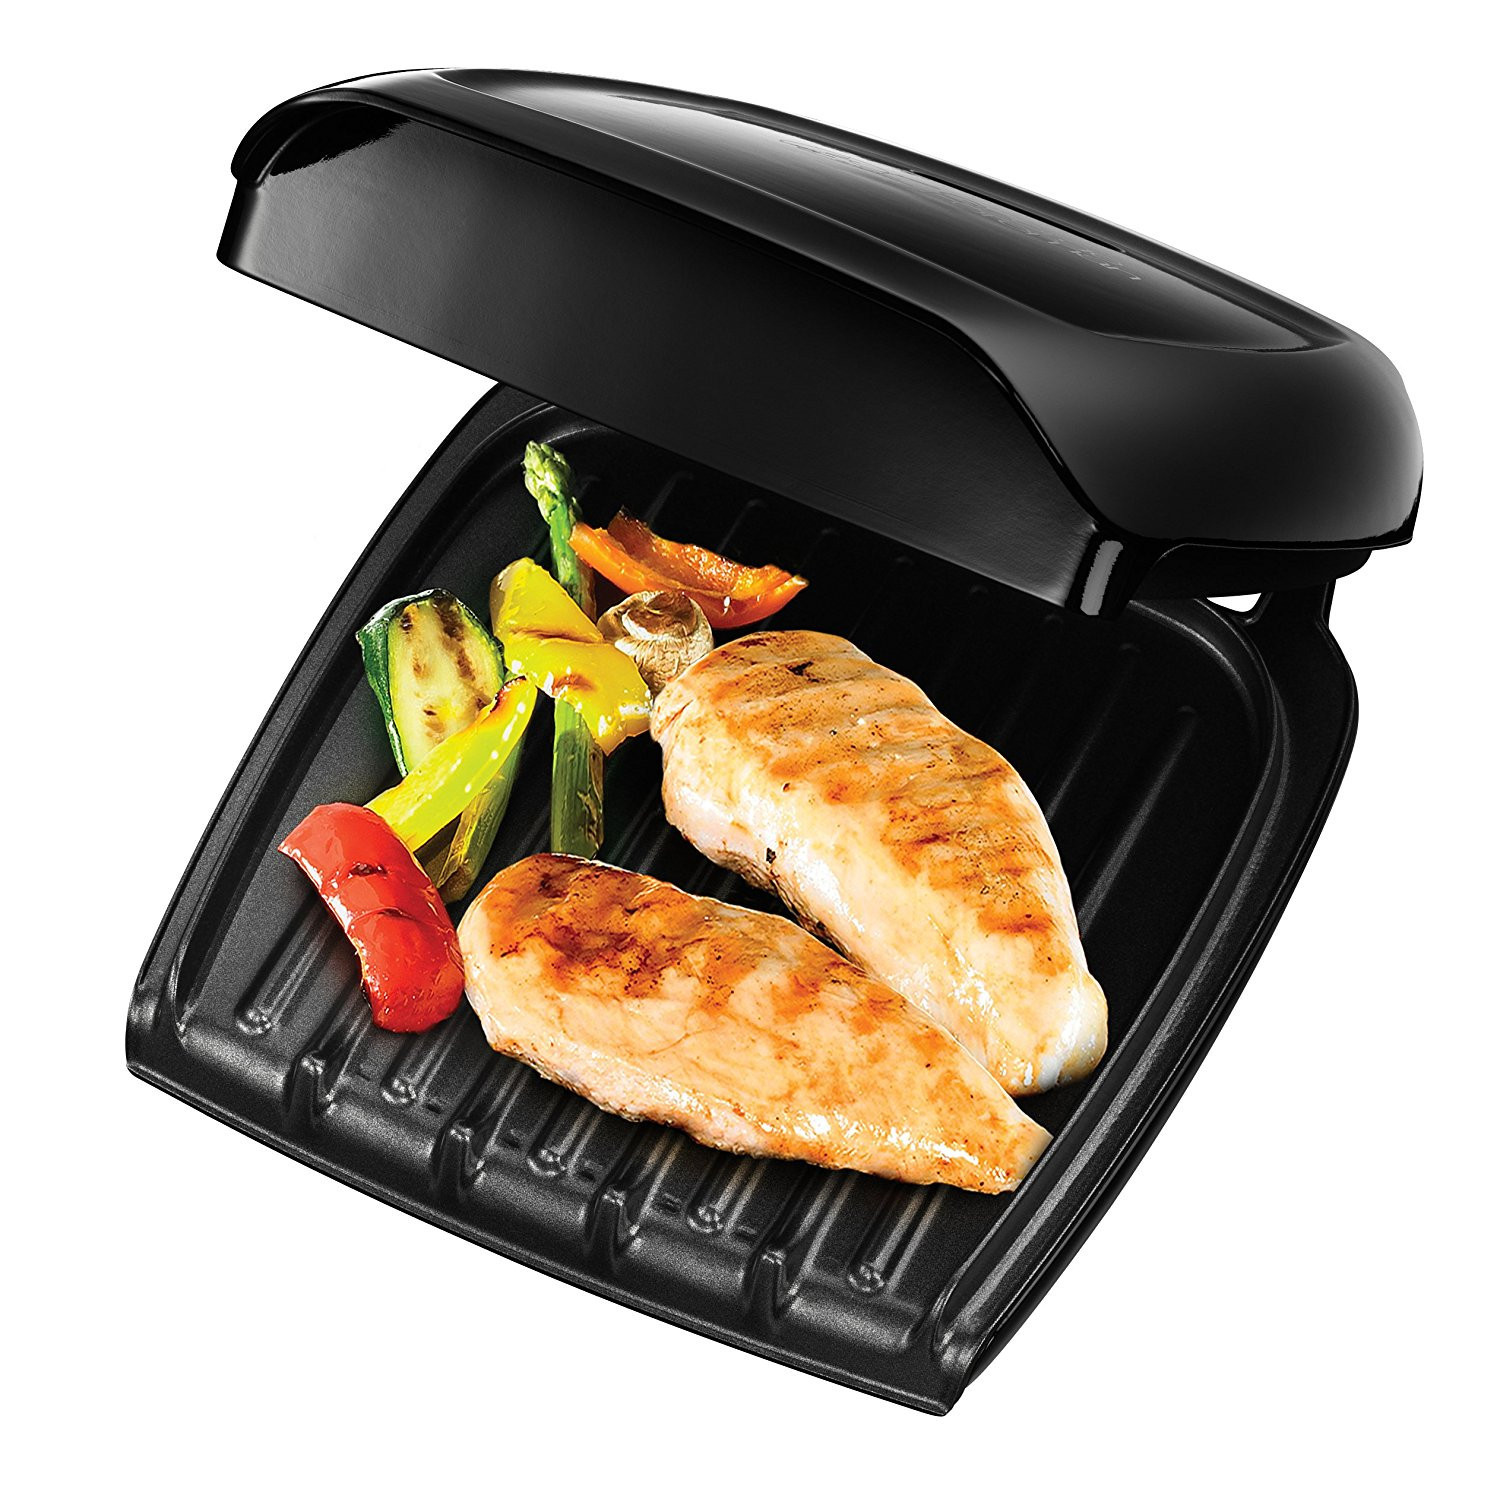 George Foreman Grill Recipes Panini
 The top 35 Ideas About George foreman Grill Panini Press